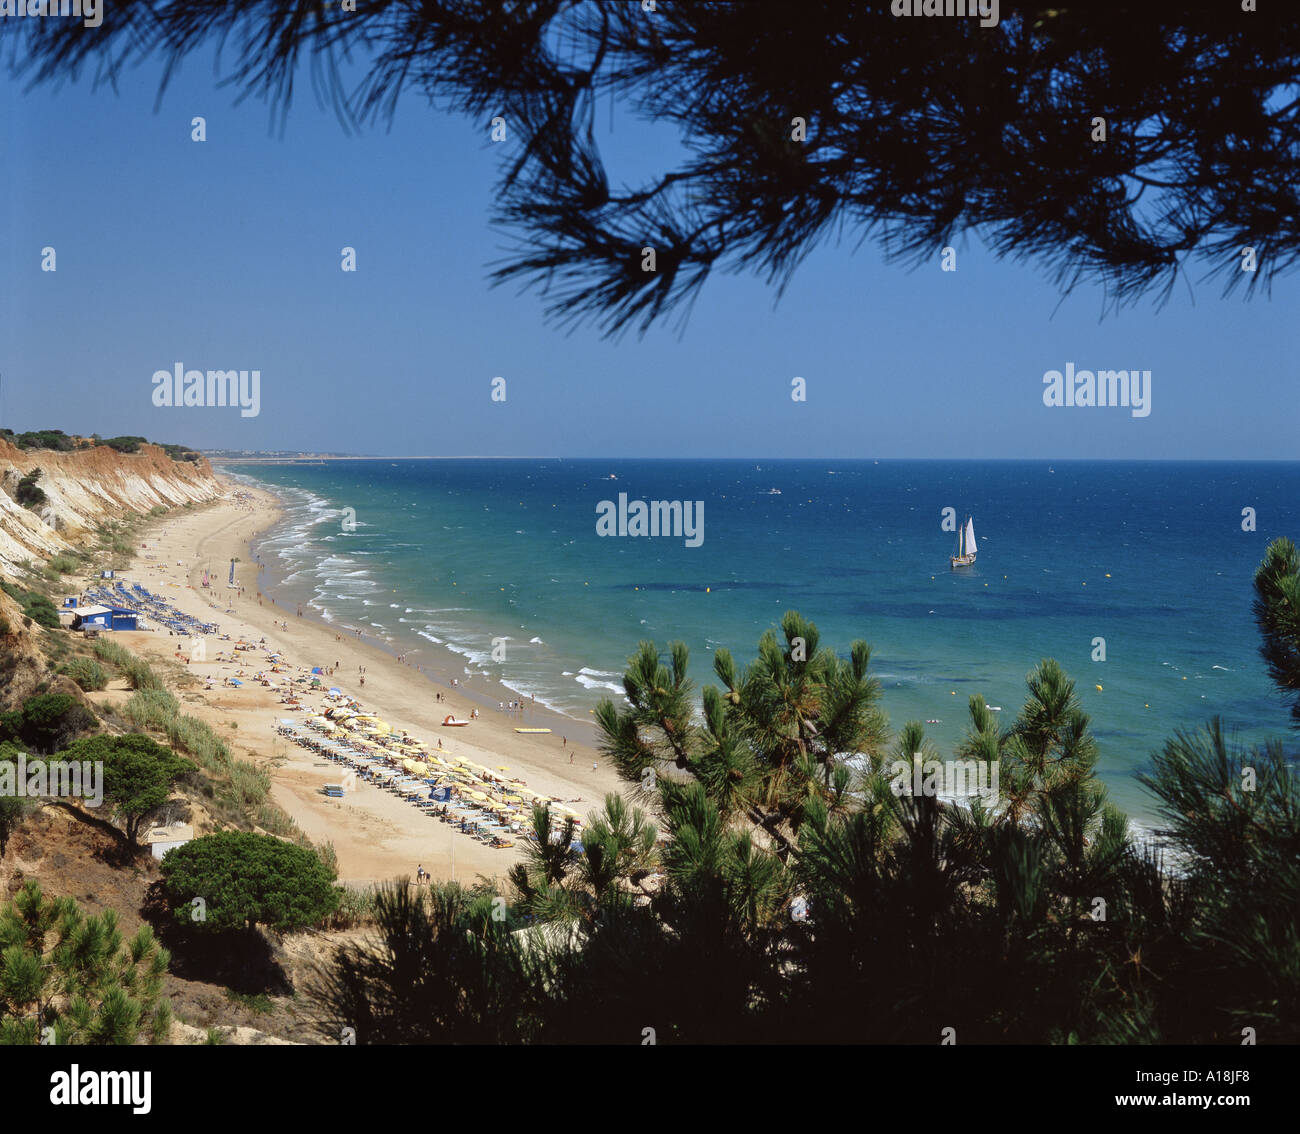 Portugal the Algarve Falesia beach seen from cliffs through pine trees Stock Photo